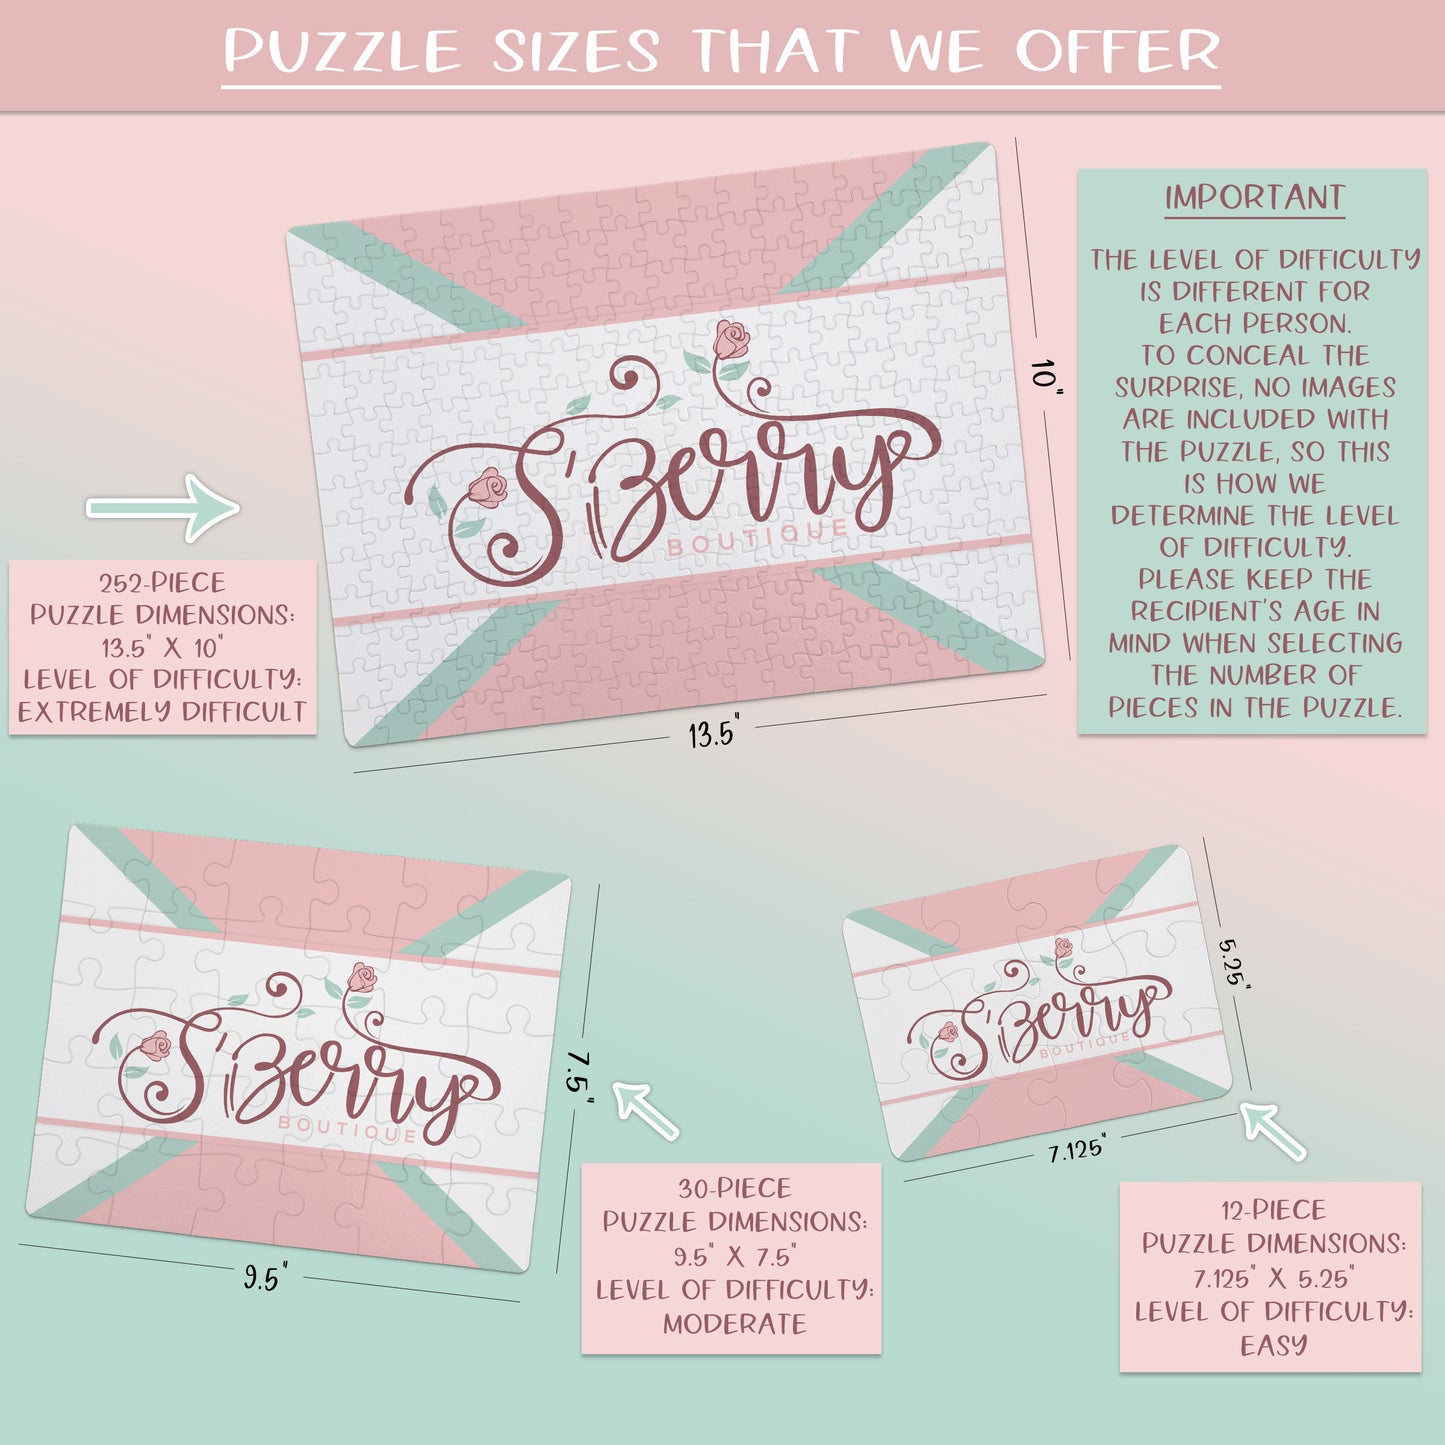 Create Your Own Puzzle - Floral Design - CYOP0157 | S'Berry Boutique